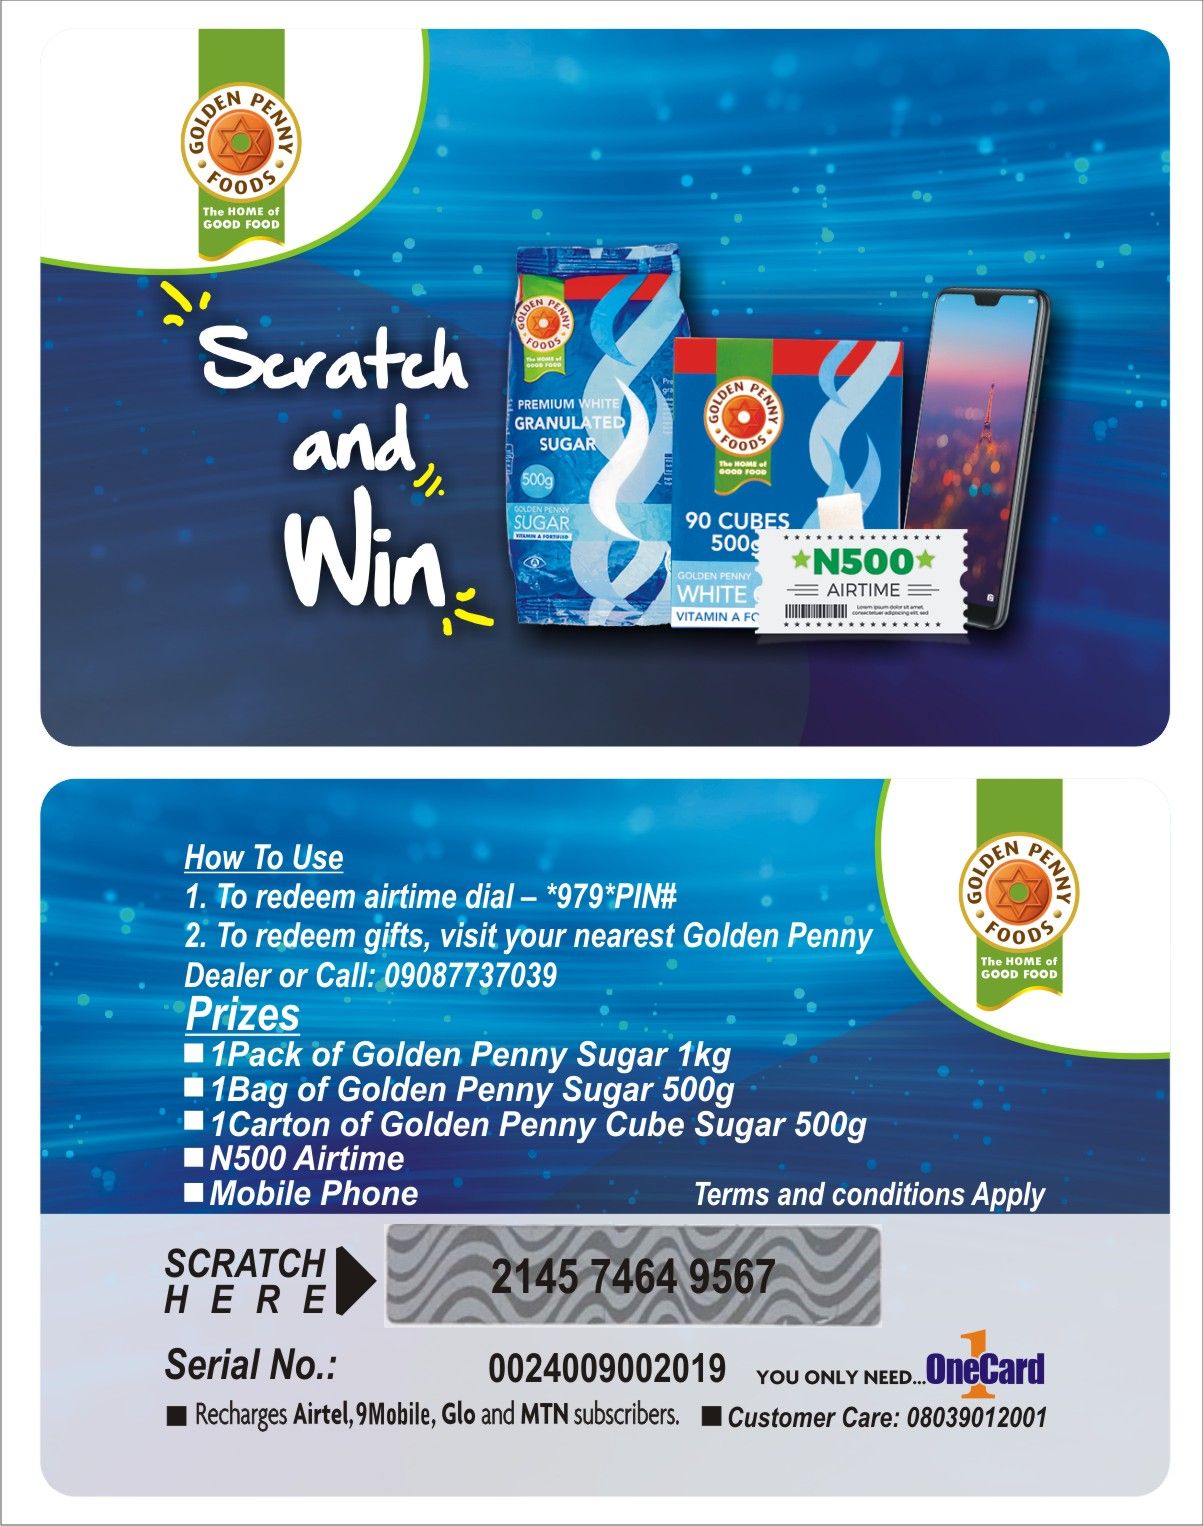 CALL CHINEDU ON 09022536974 TO PRINT SCRATCH AND WIN PROMO CARDS, POLITICAL CAMPAIGN SCRATCH CARDS, RAFFLE DRAW TICKETS